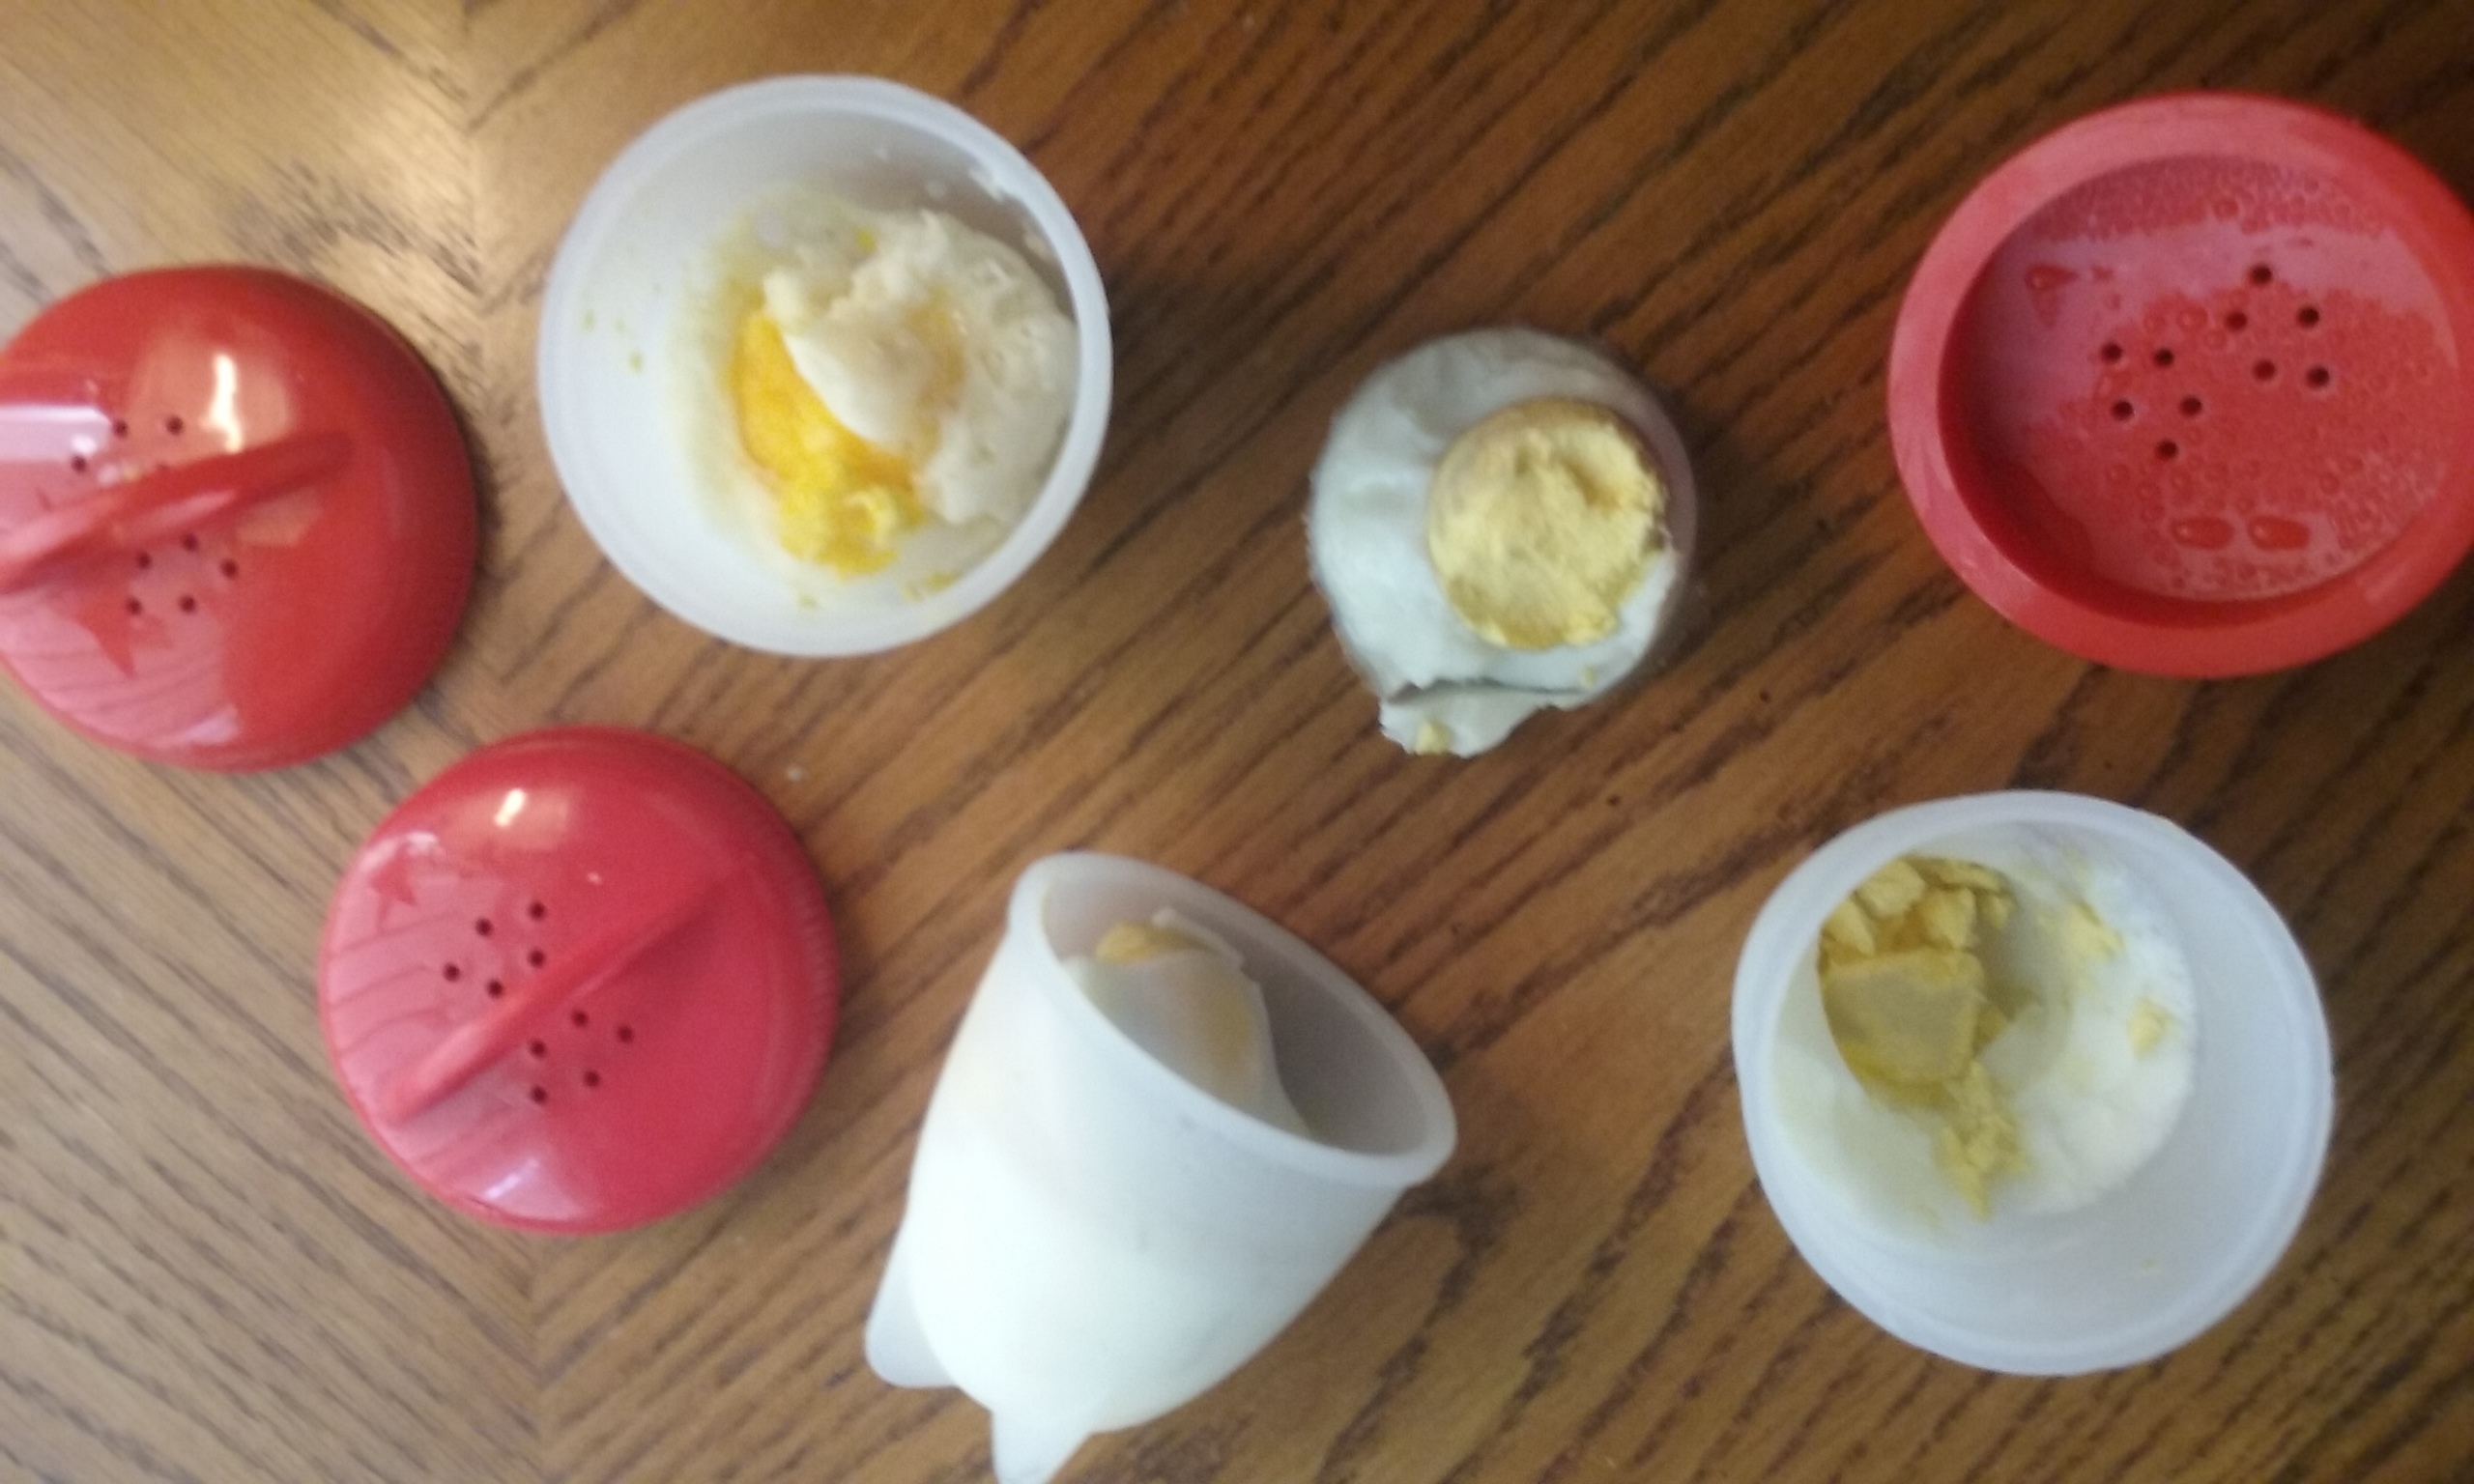 SET OF 6 NON-STICK SILICONE EGG COOKERS